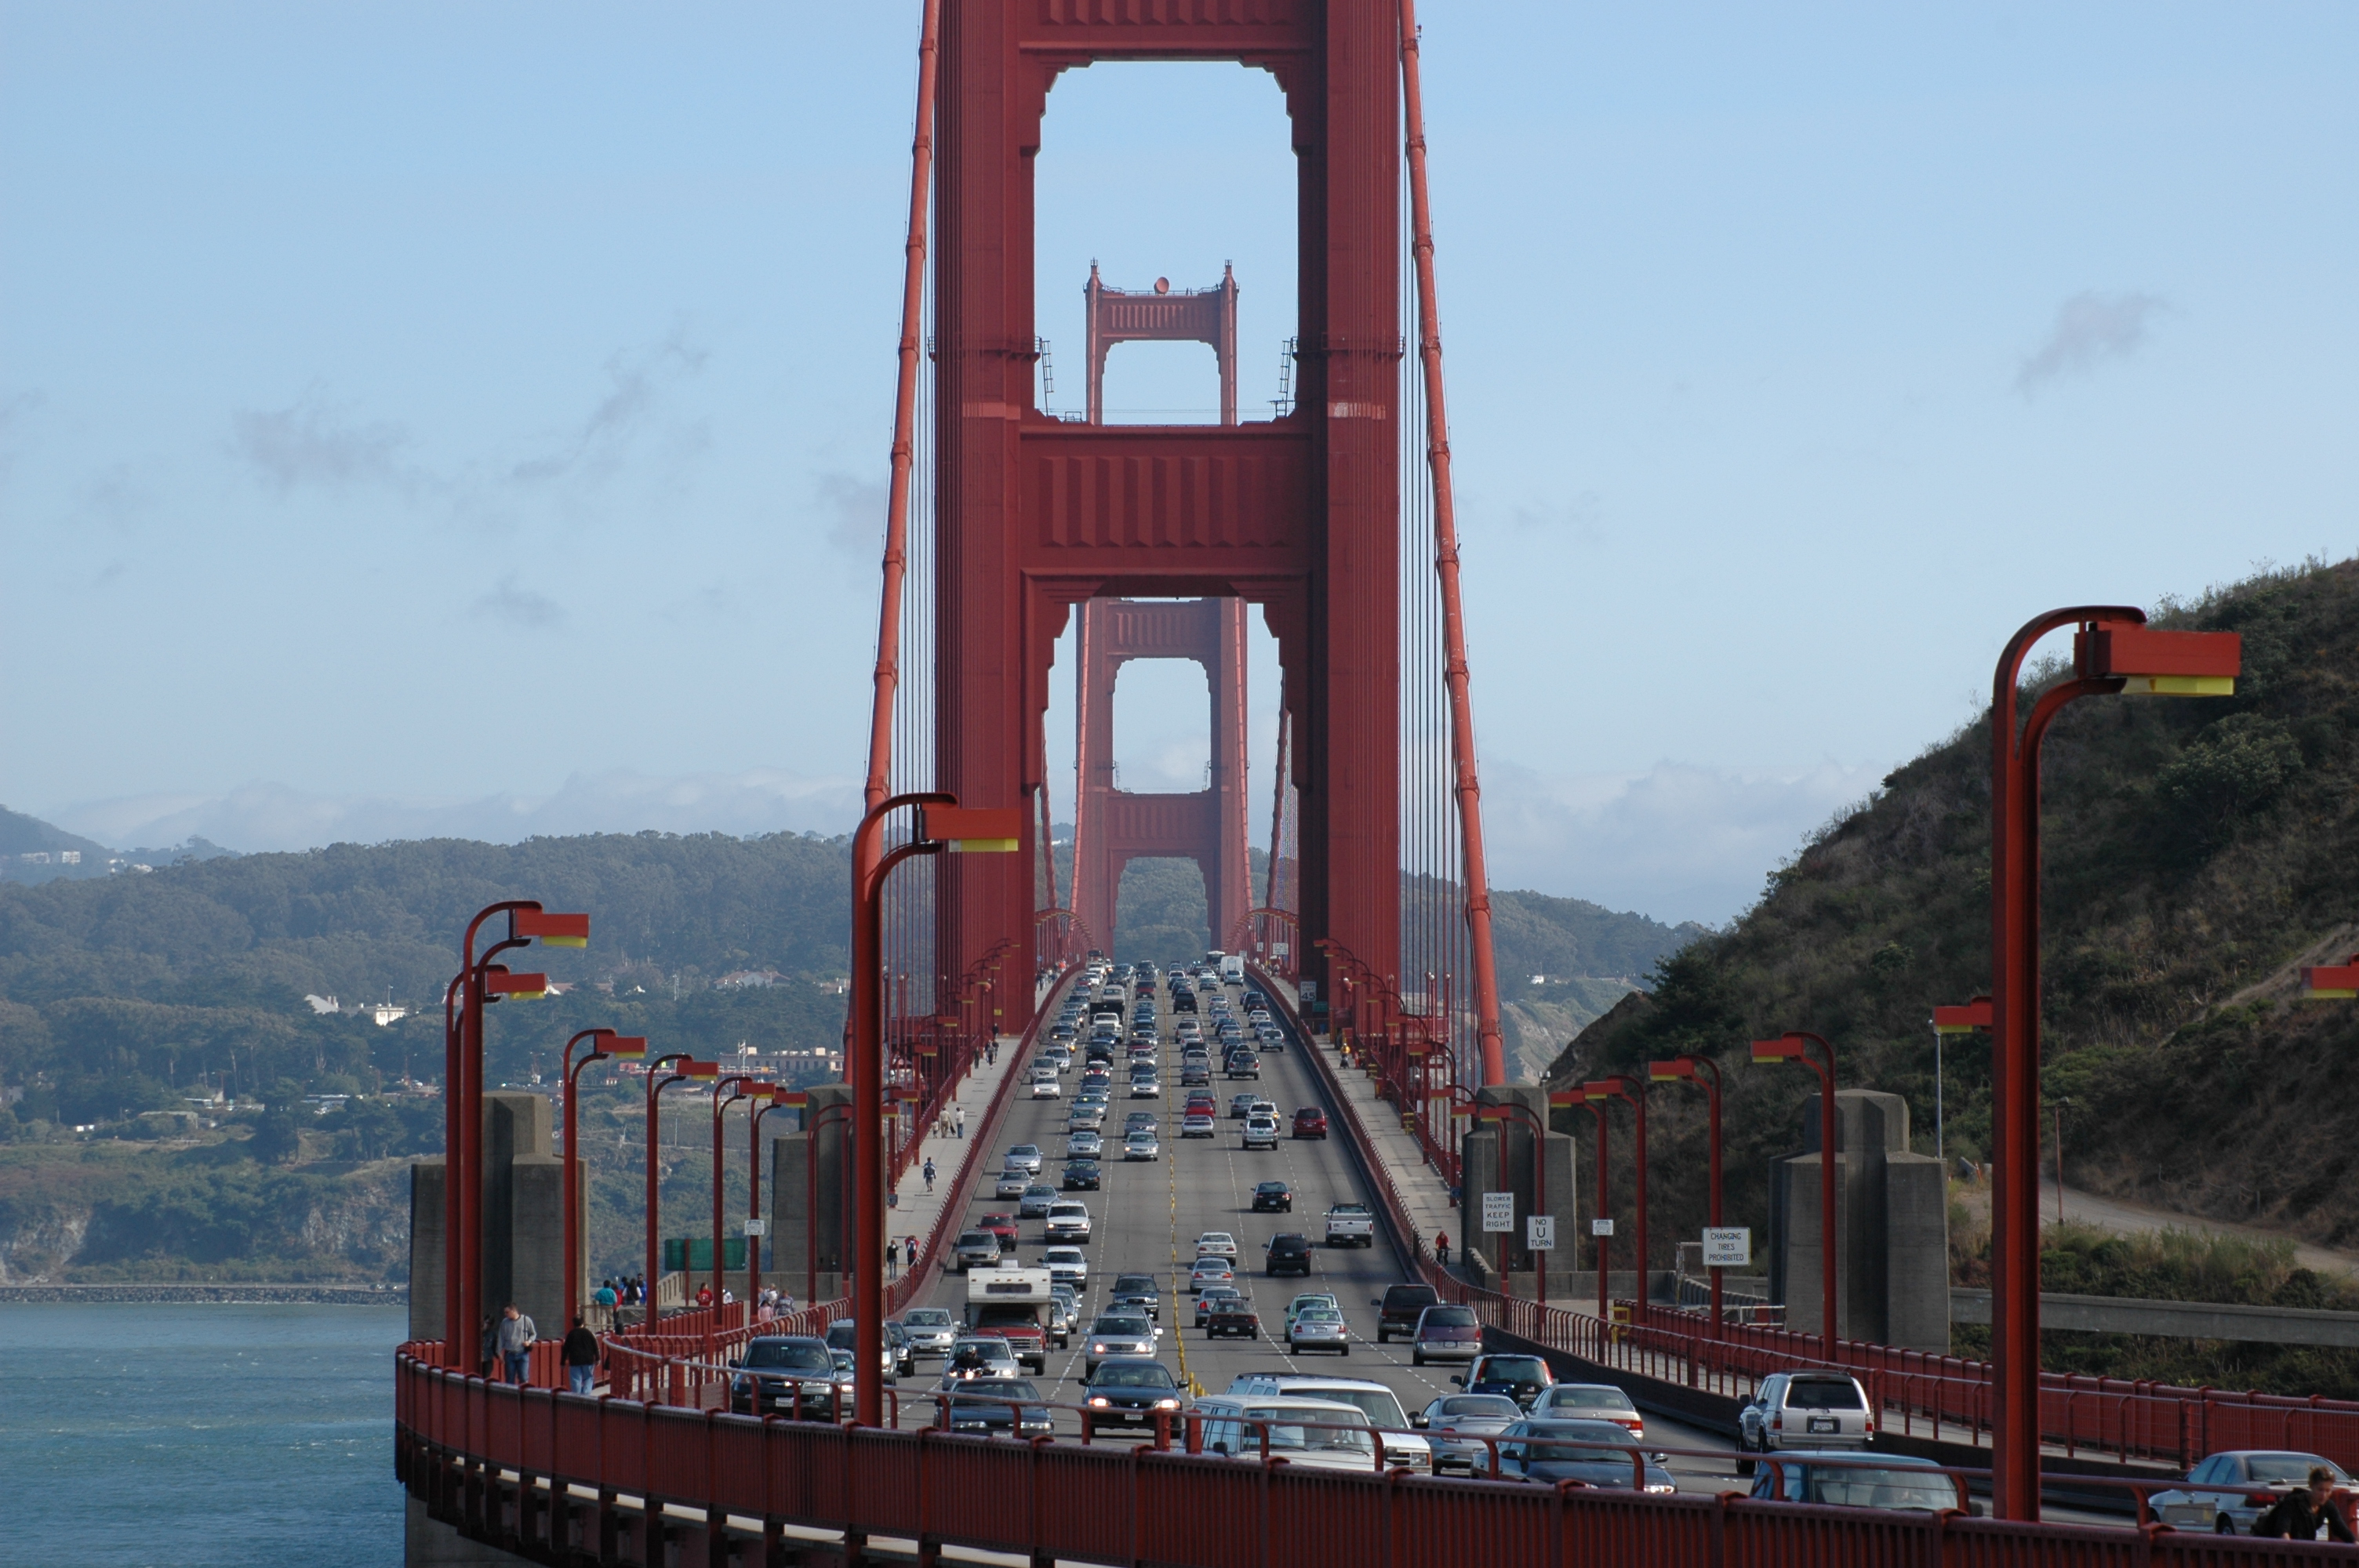 Construction on Doyle Drive causes delays on Golden Gate Bridge. Photo by Henner Zeller.